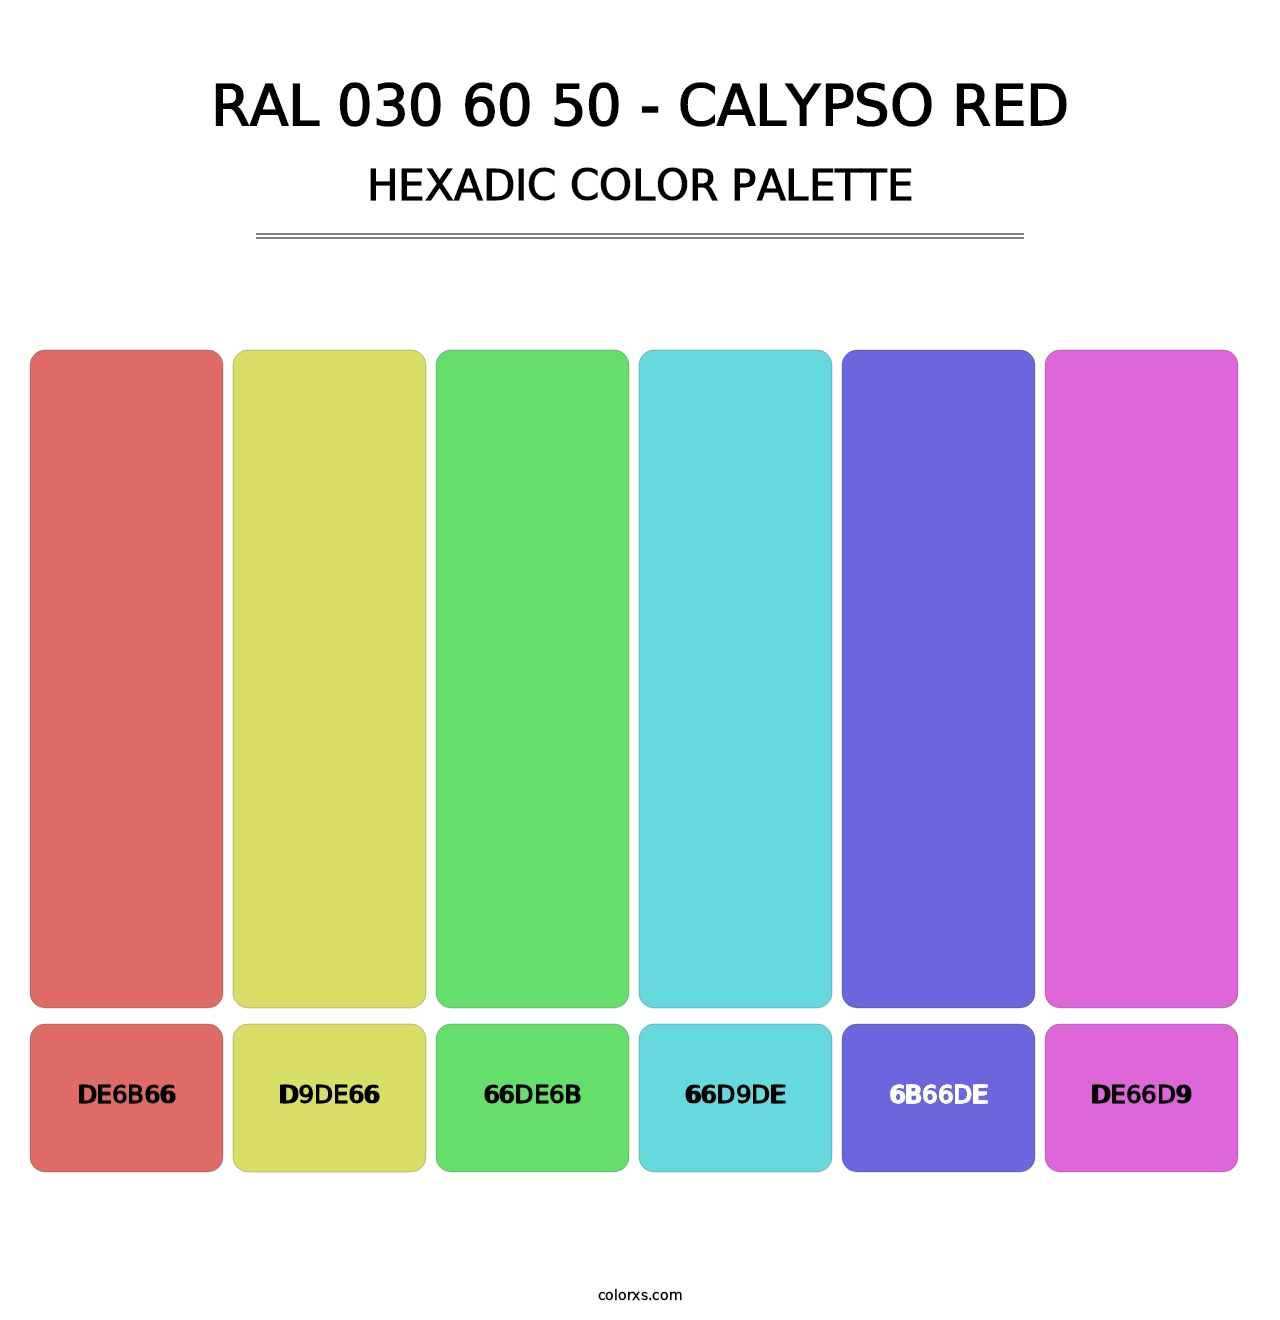 RAL 030 60 50 - Calypso Red - Hexadic Color Palette